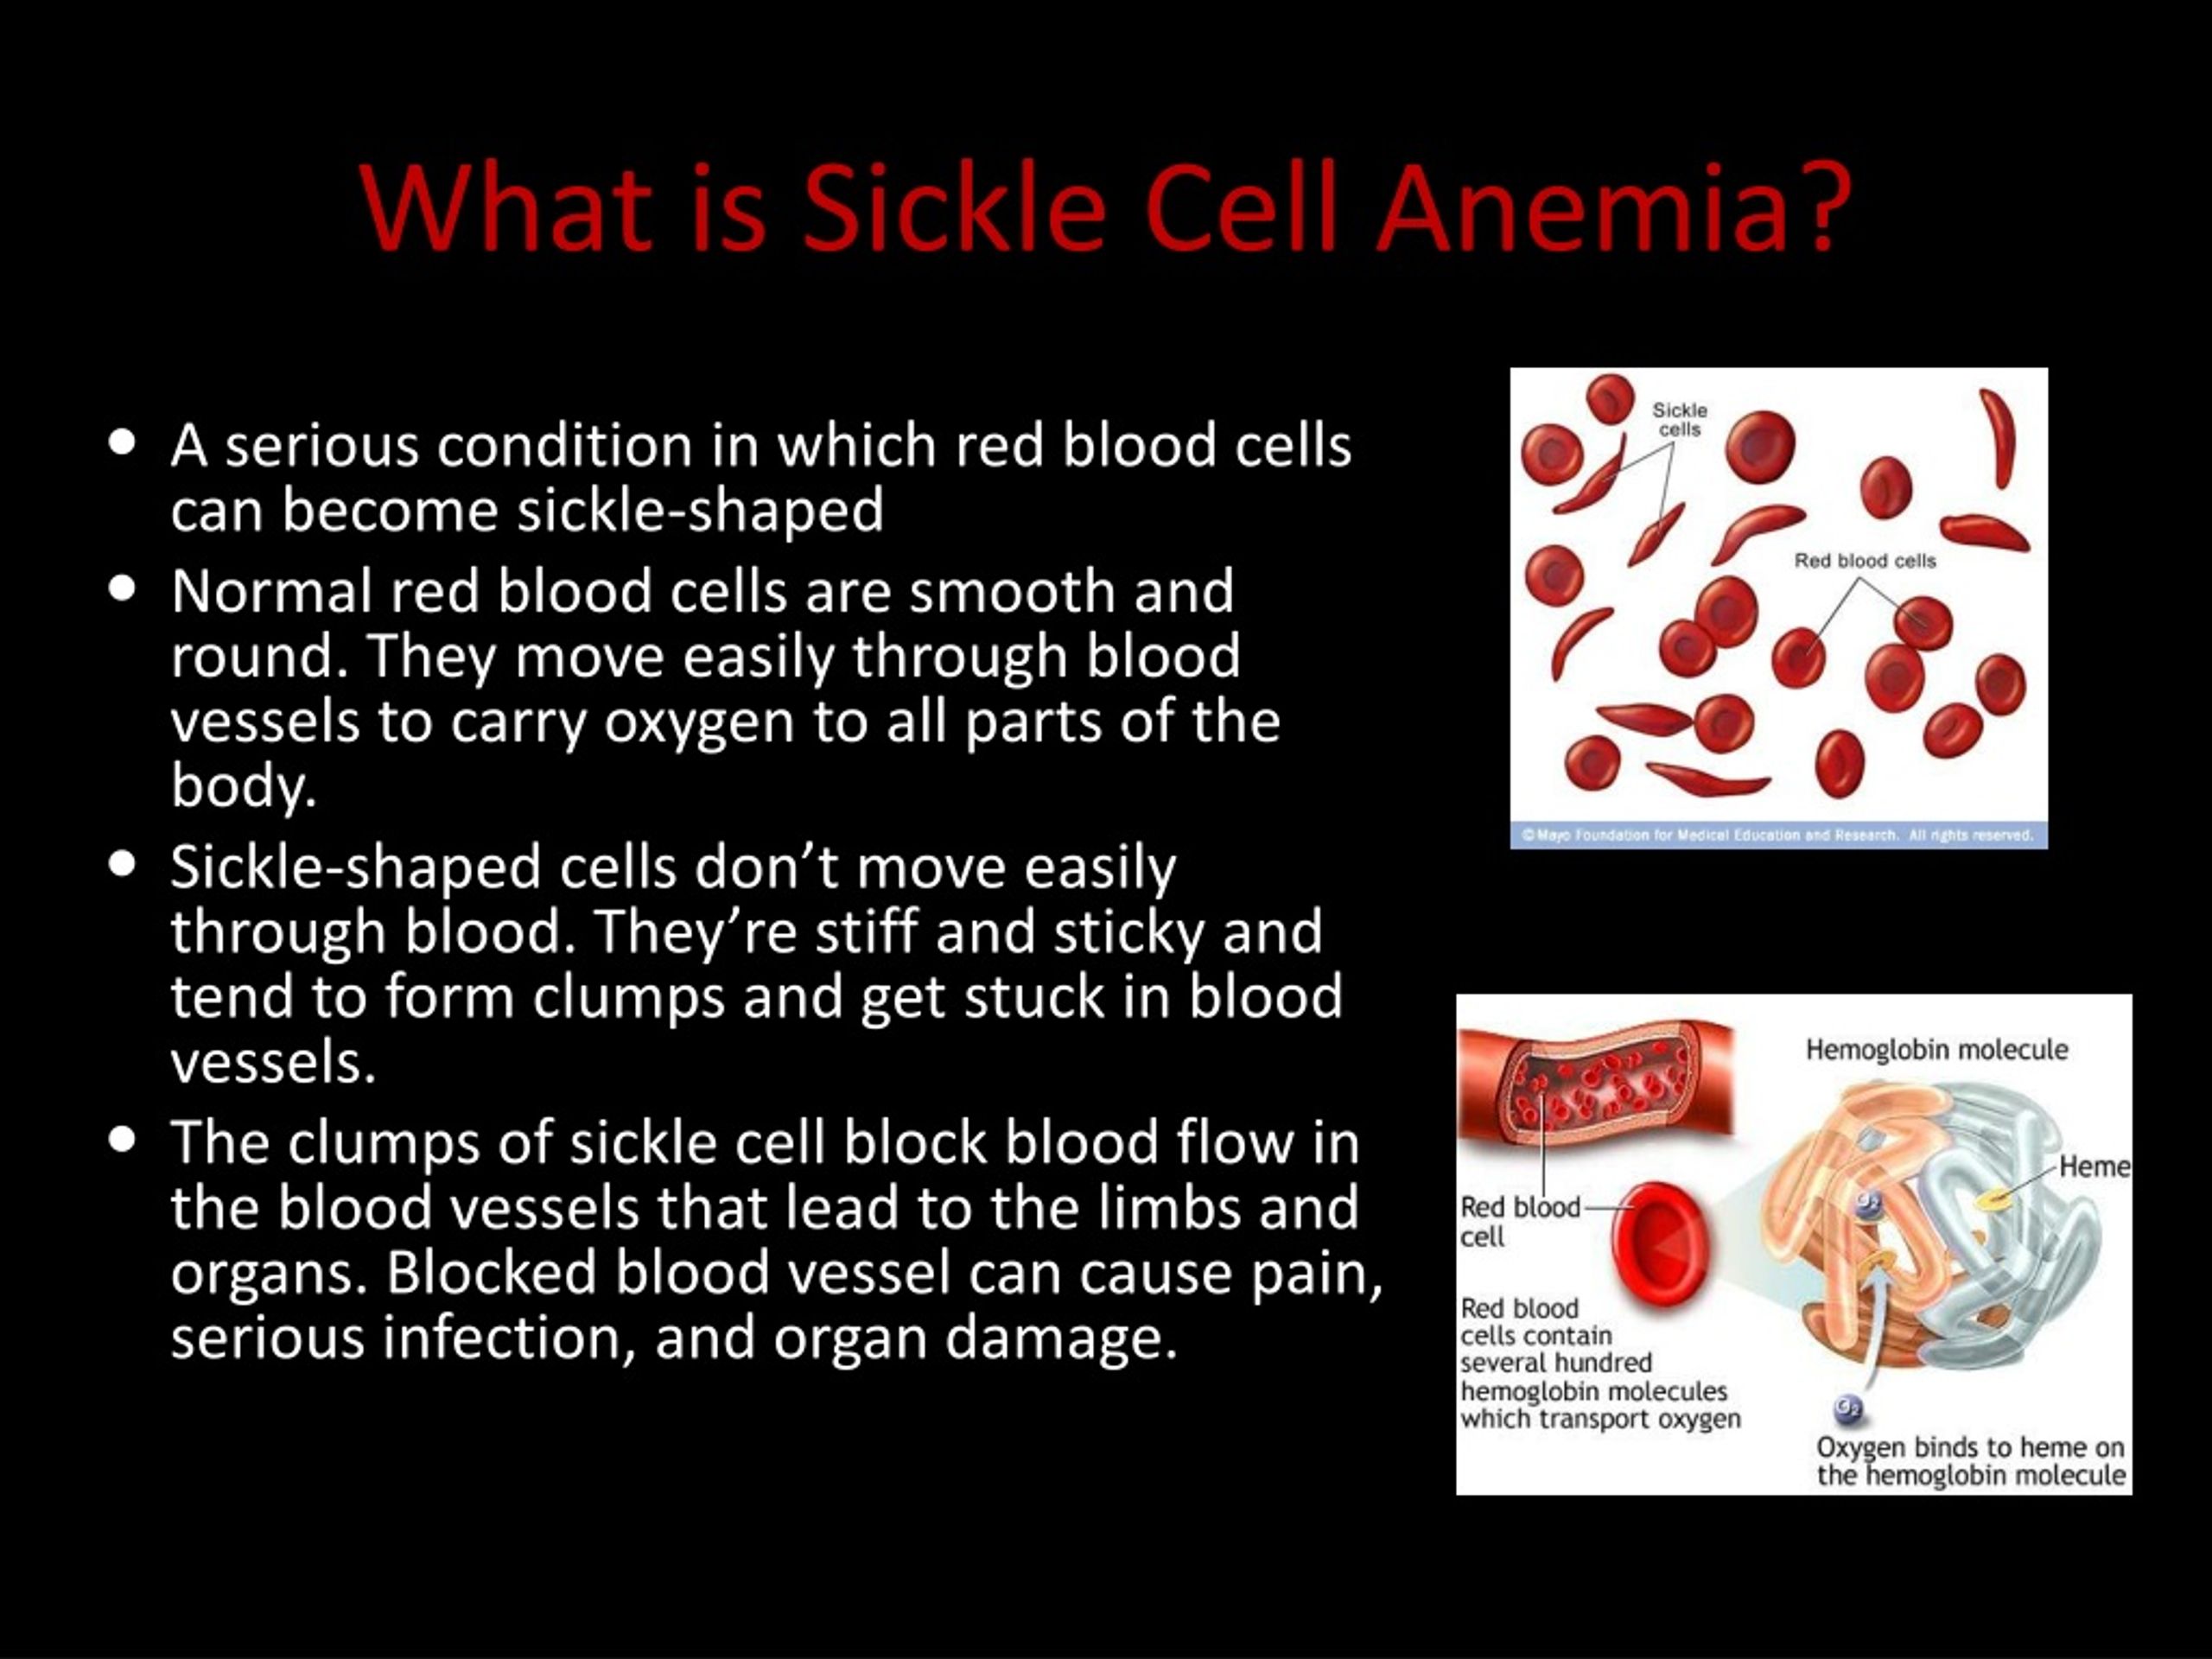 powerpoint presentation on sickle cell anemia